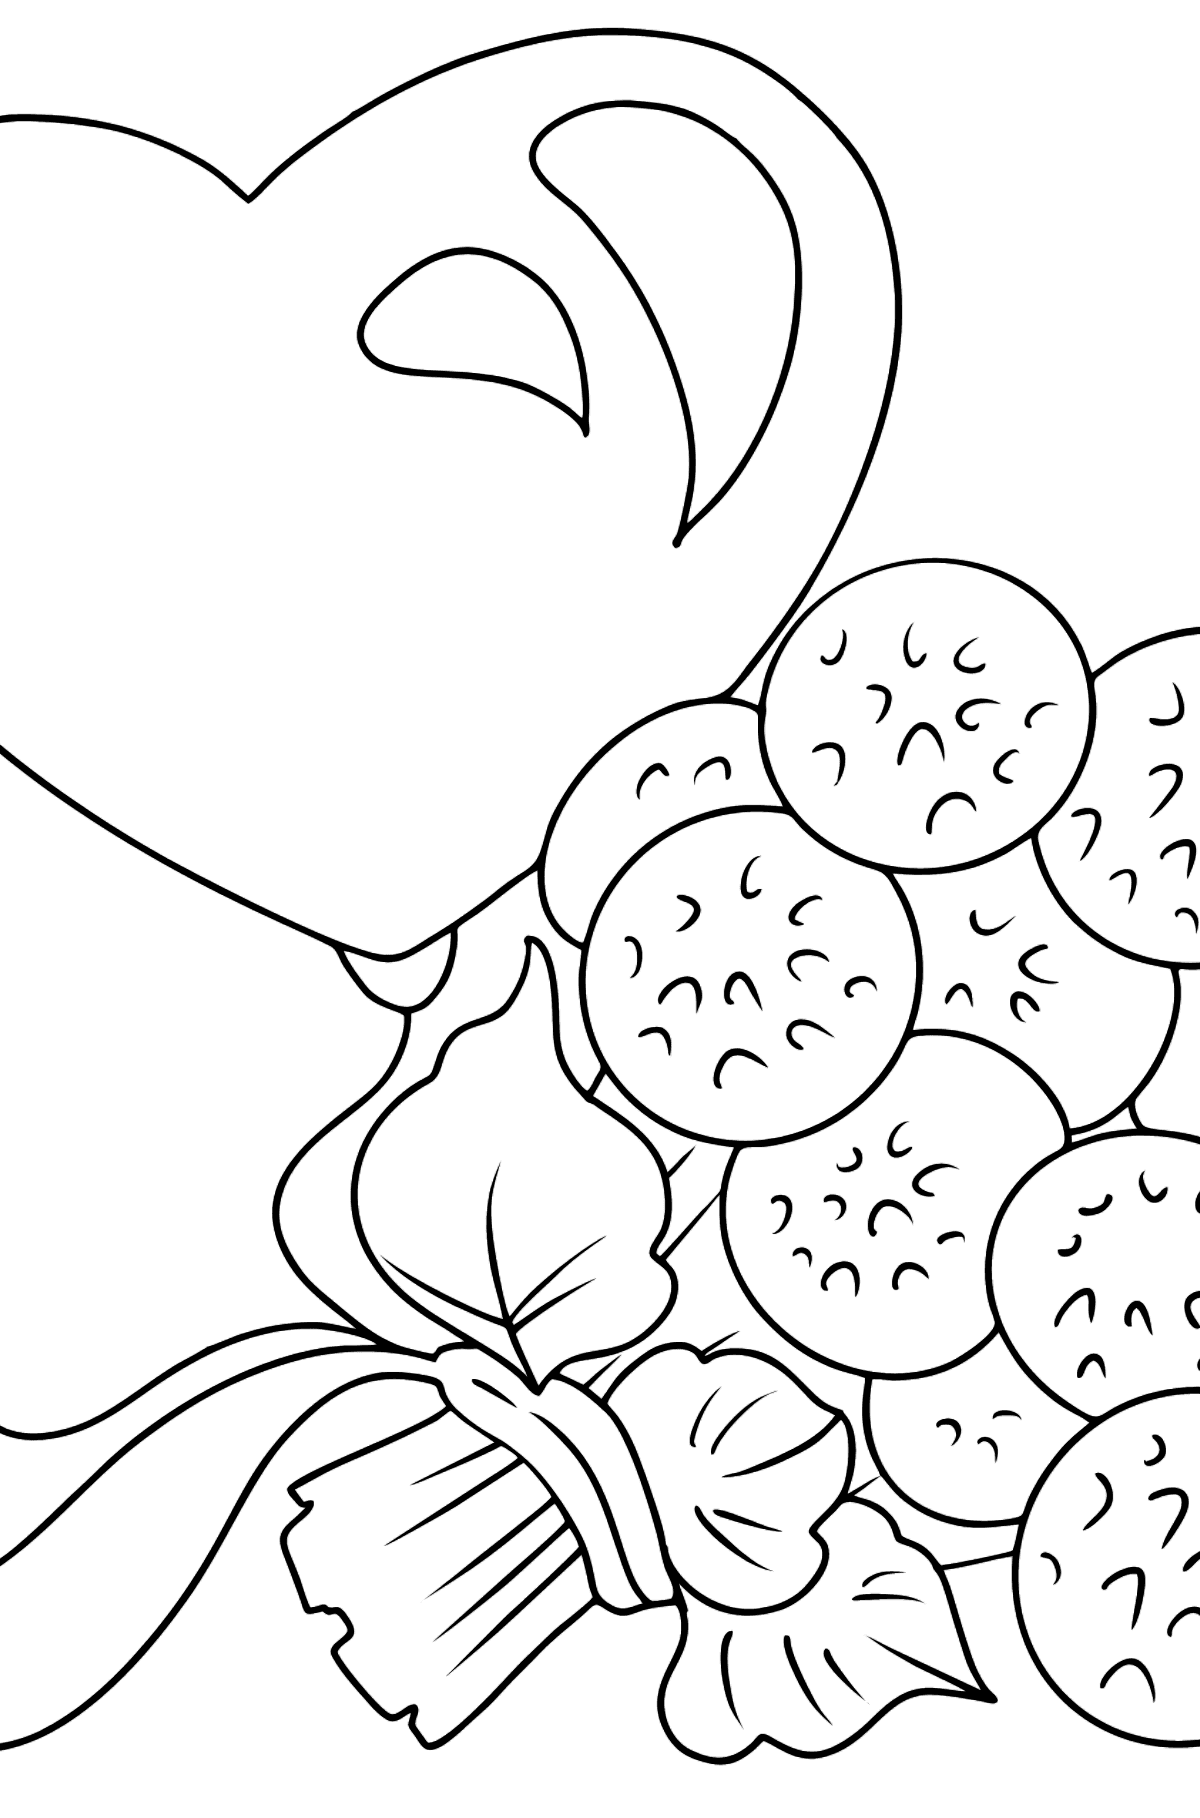 Coloring Page - flowers with a heart - Coloring Pages for Kids